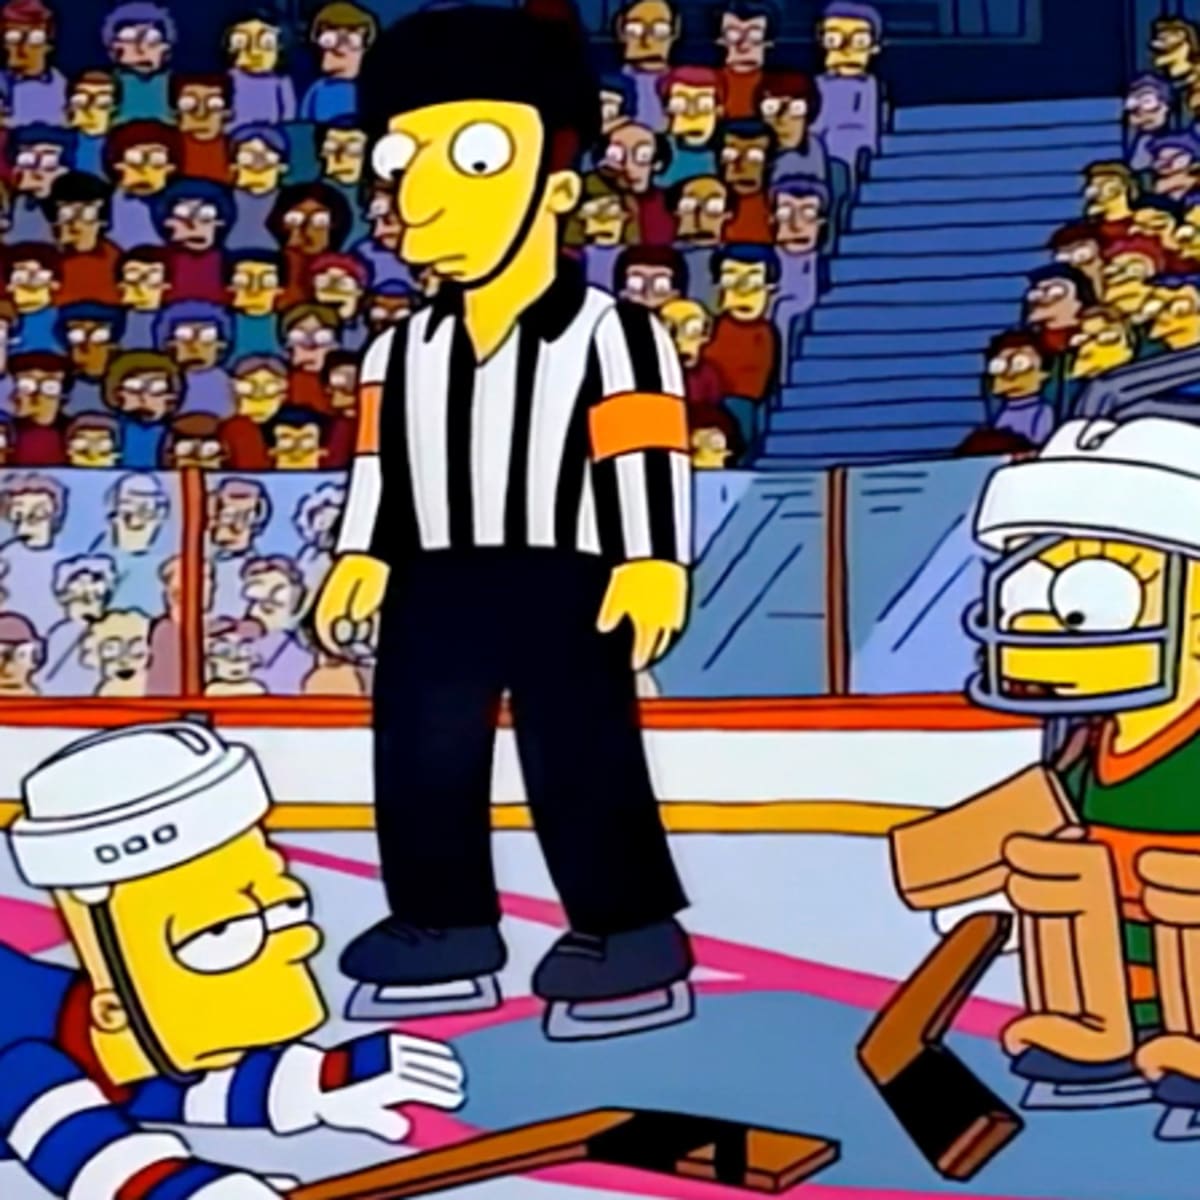 Wayne Gretzky to make appearance on The Simpsons